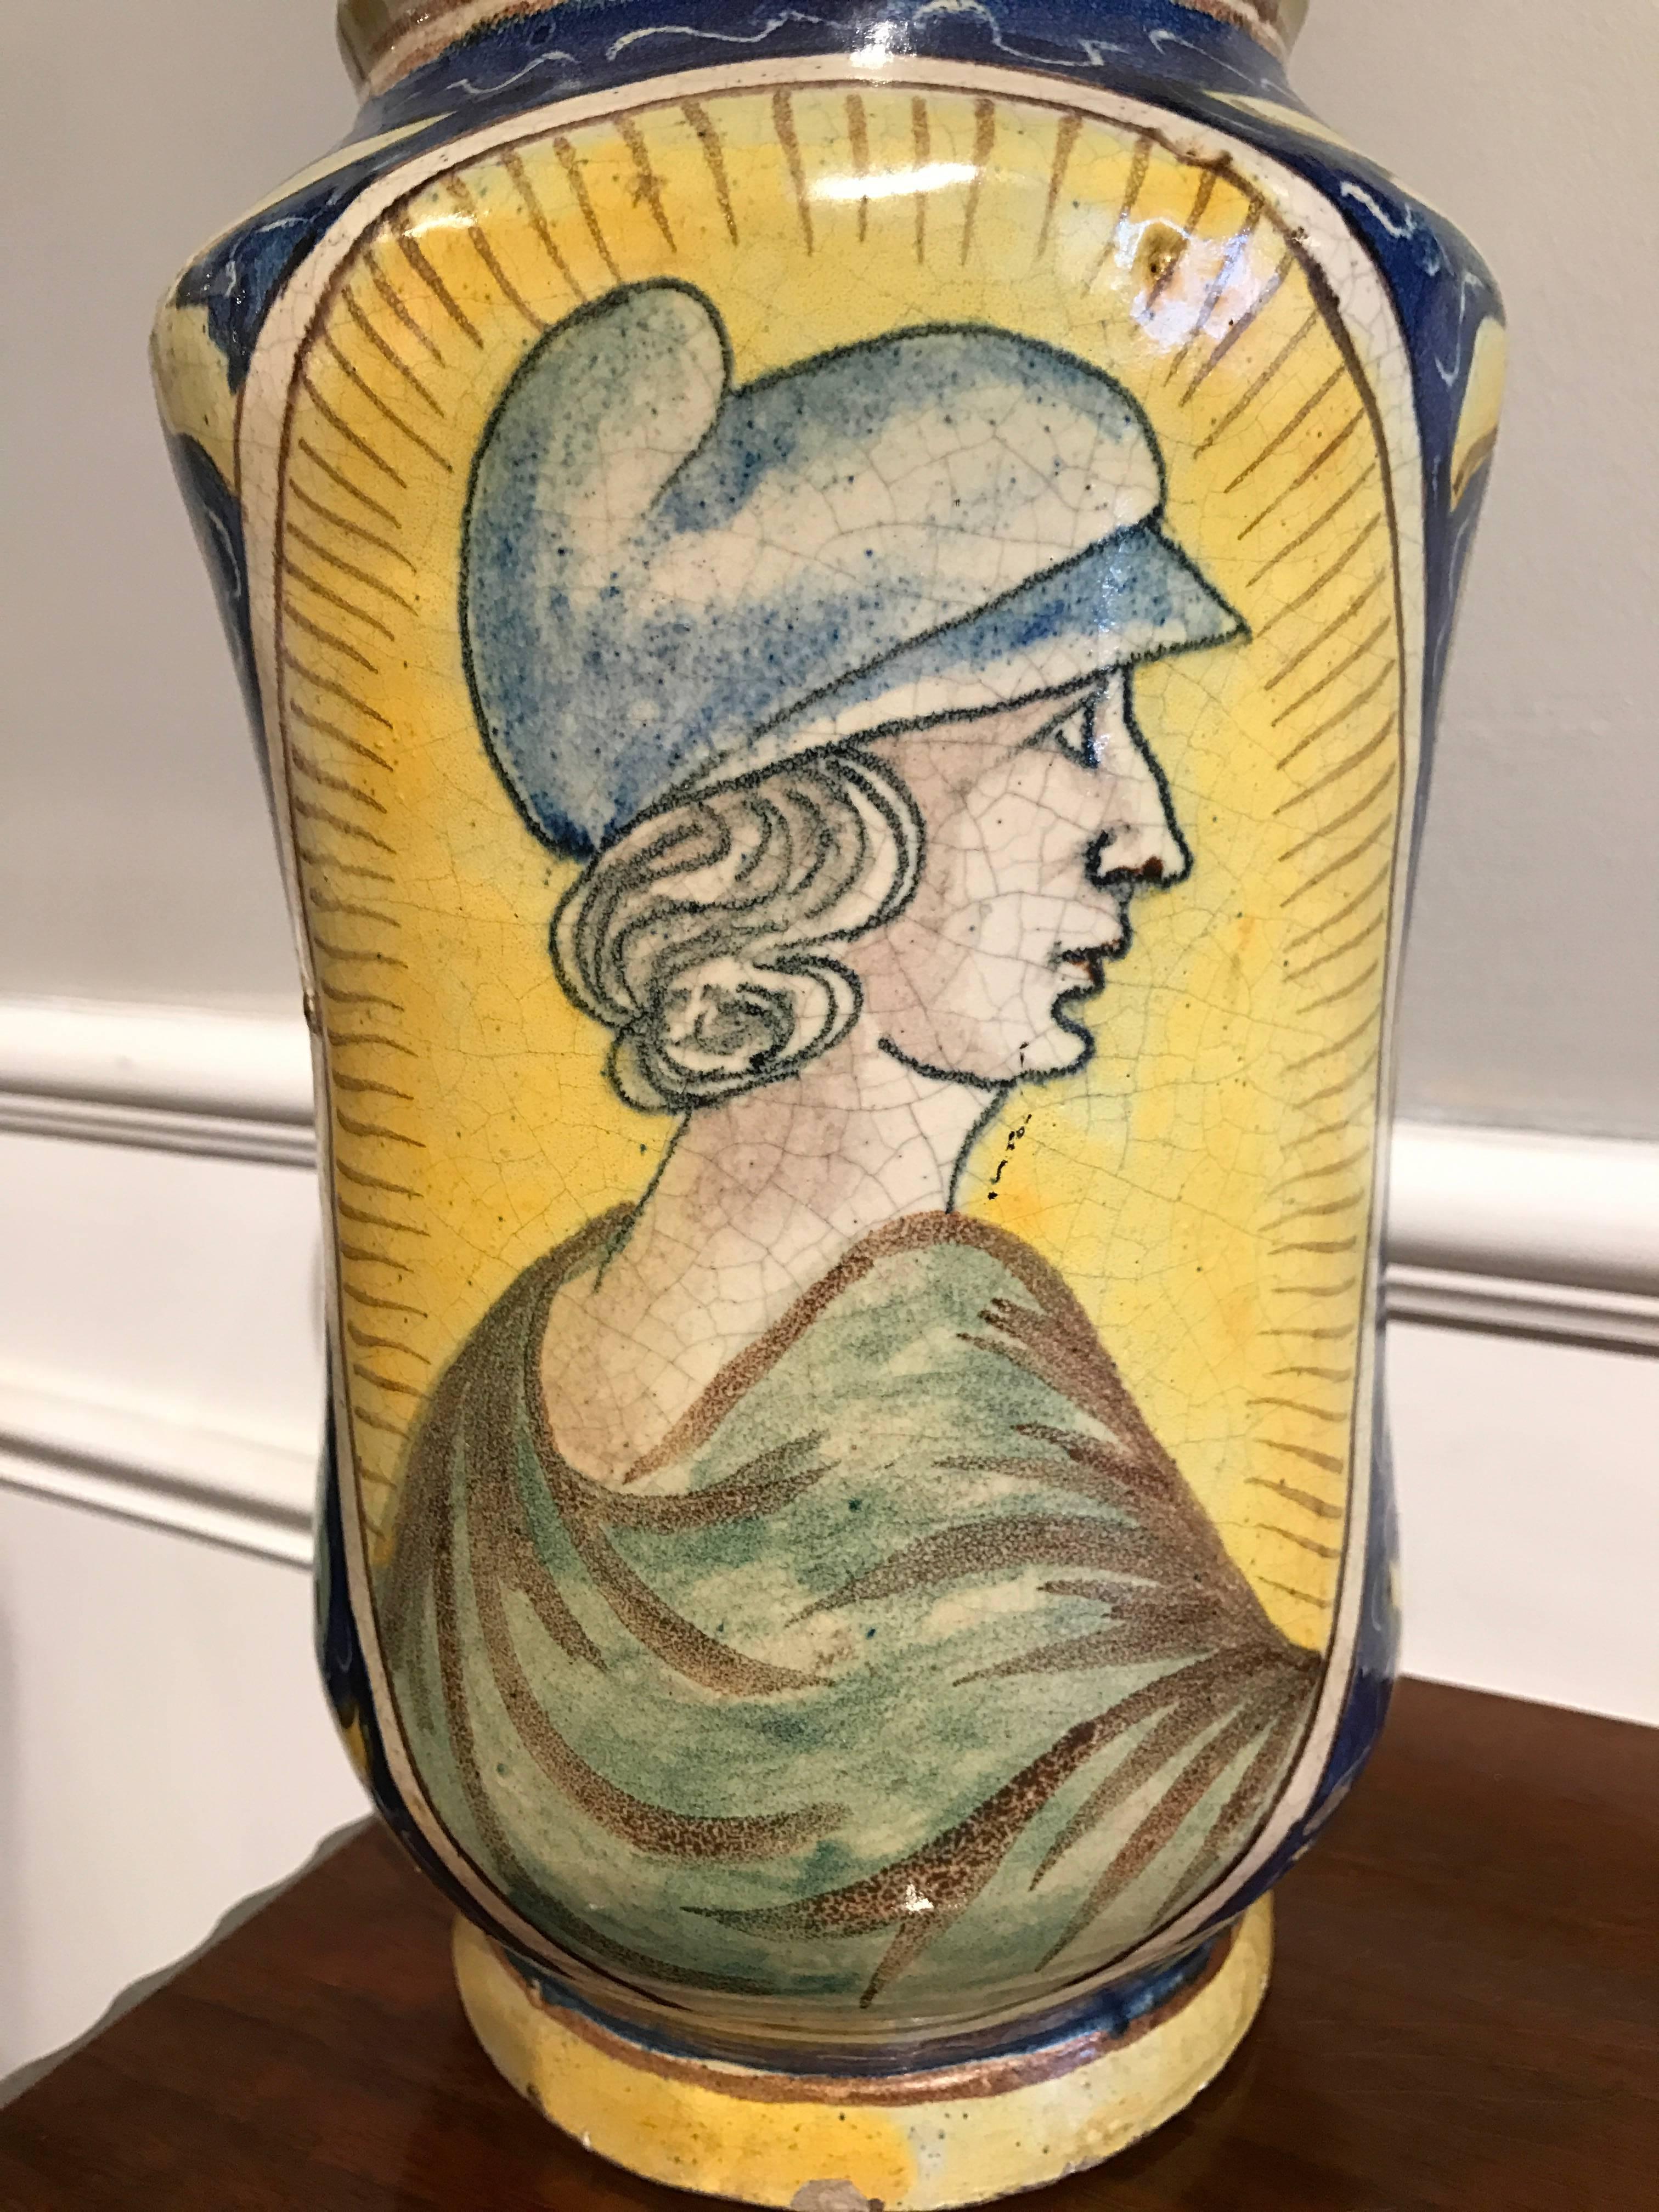 An impressive 17th century polychrome decorated drug jar or 'Albarello'.

The Albarello is of a typical waisted shape, and is decorated profusely in polychrome with a wonderful portrait of a man wearing a 'Dantesque' cap contained within an